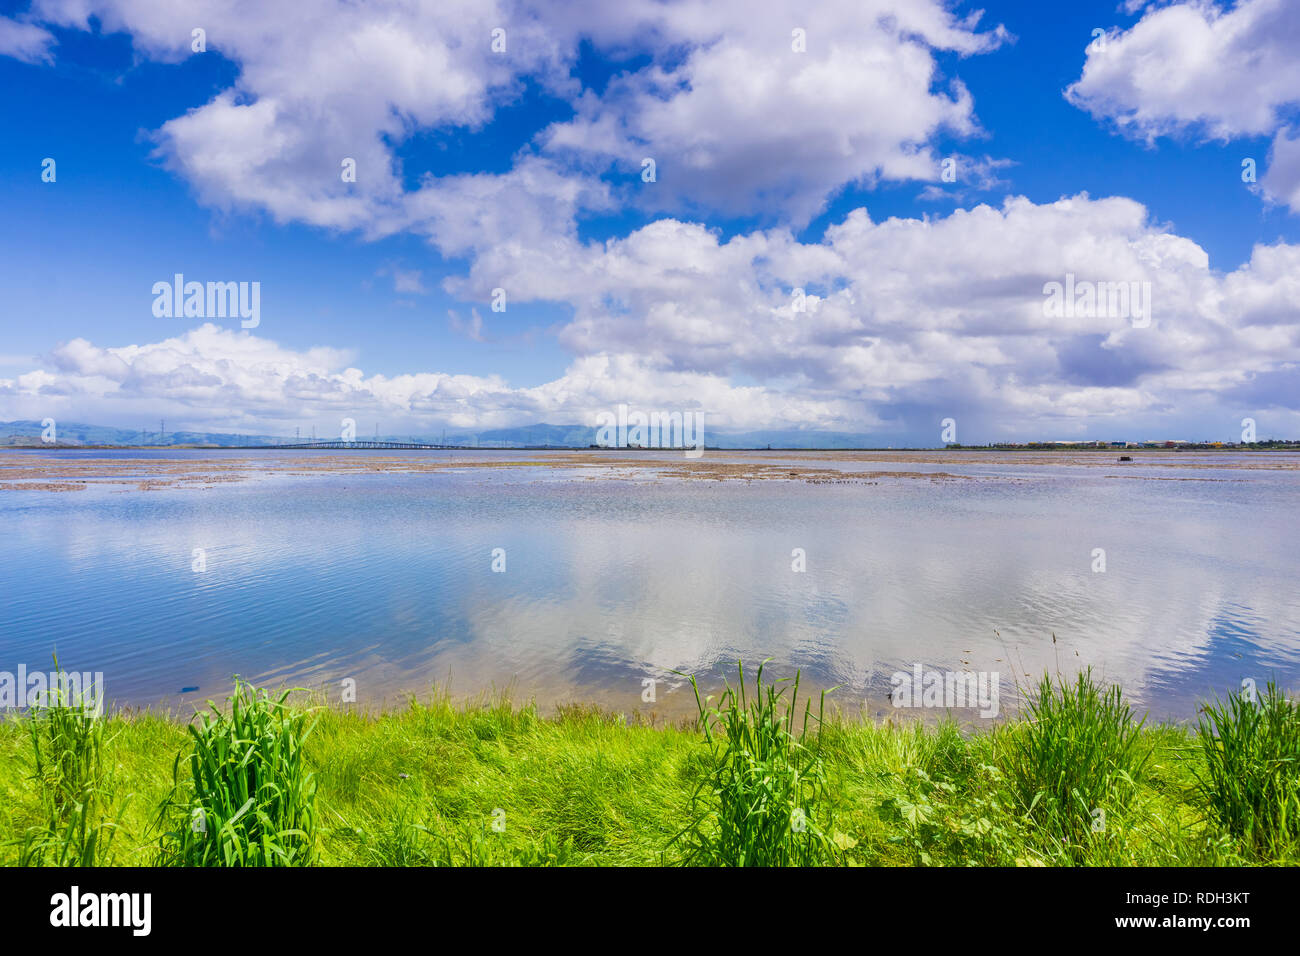 Cloudscape reflected in the ponds; Dumbarton bridge and office buildings in the background; Bedwell Bayfront Park, Menlo Park, San Francisco bay area, Stock Photo